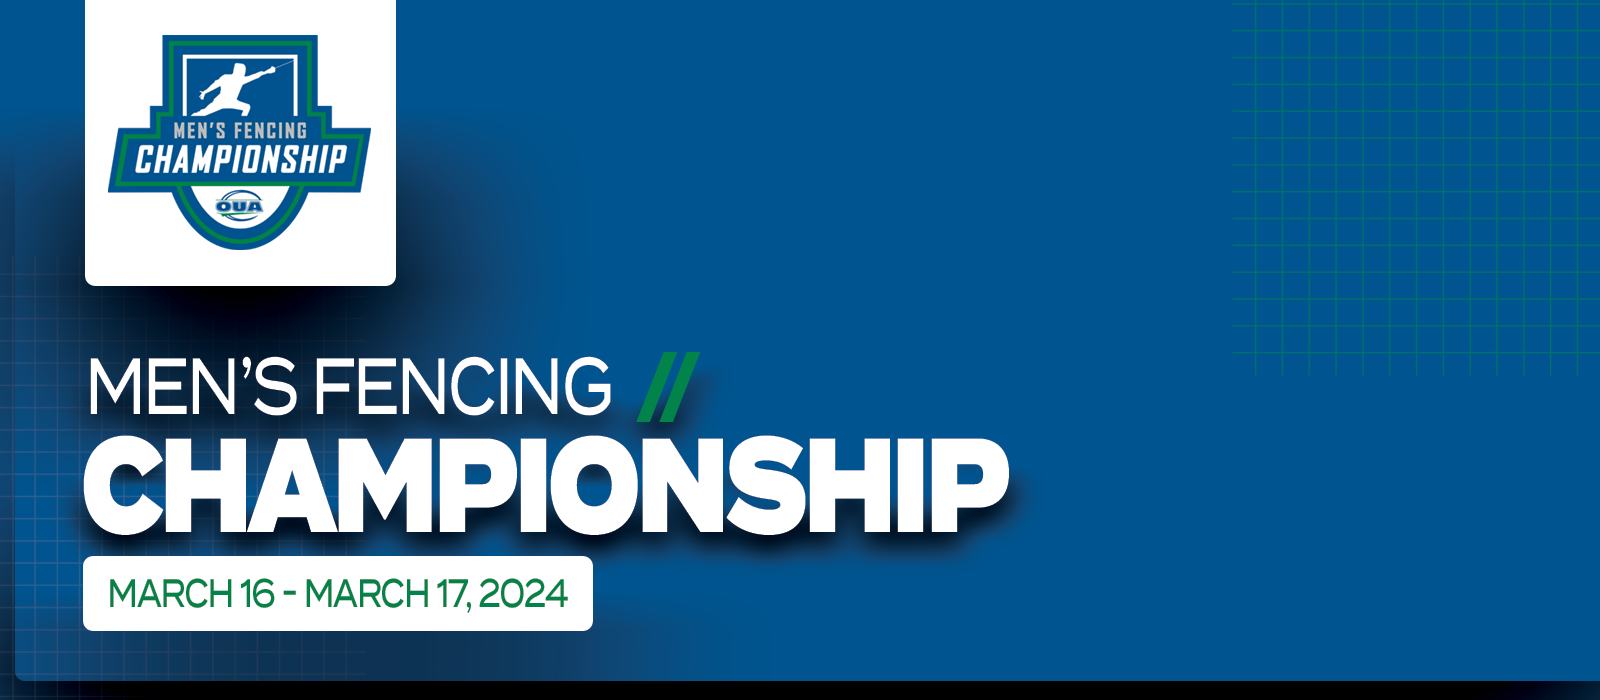 Predominantly blue graphic with large white text on the left side that reads Men’s Fencing Championship, March 16 - March 17, 2024’ beneath the OUA Men’s Fencing Championship logo